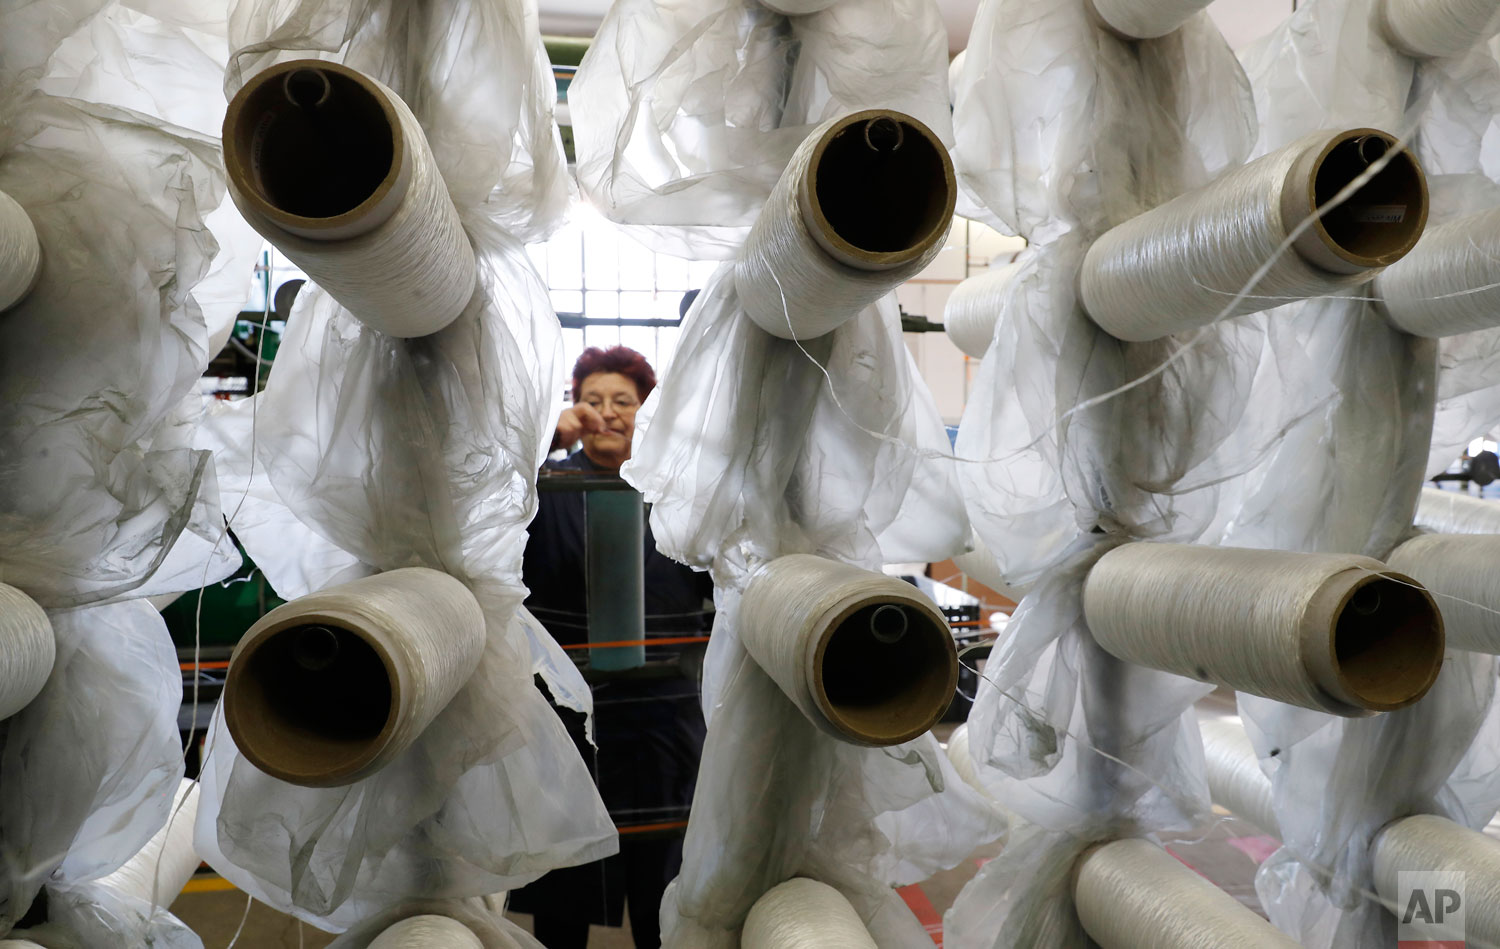  In this photo taken on Wednesday, Feb. 6, 2019, a woman works at "La Rete" (The Net) factory in Monte Isola, Lake Iseo, northern Italy.   (AP Photo/Antonio Calanni) 